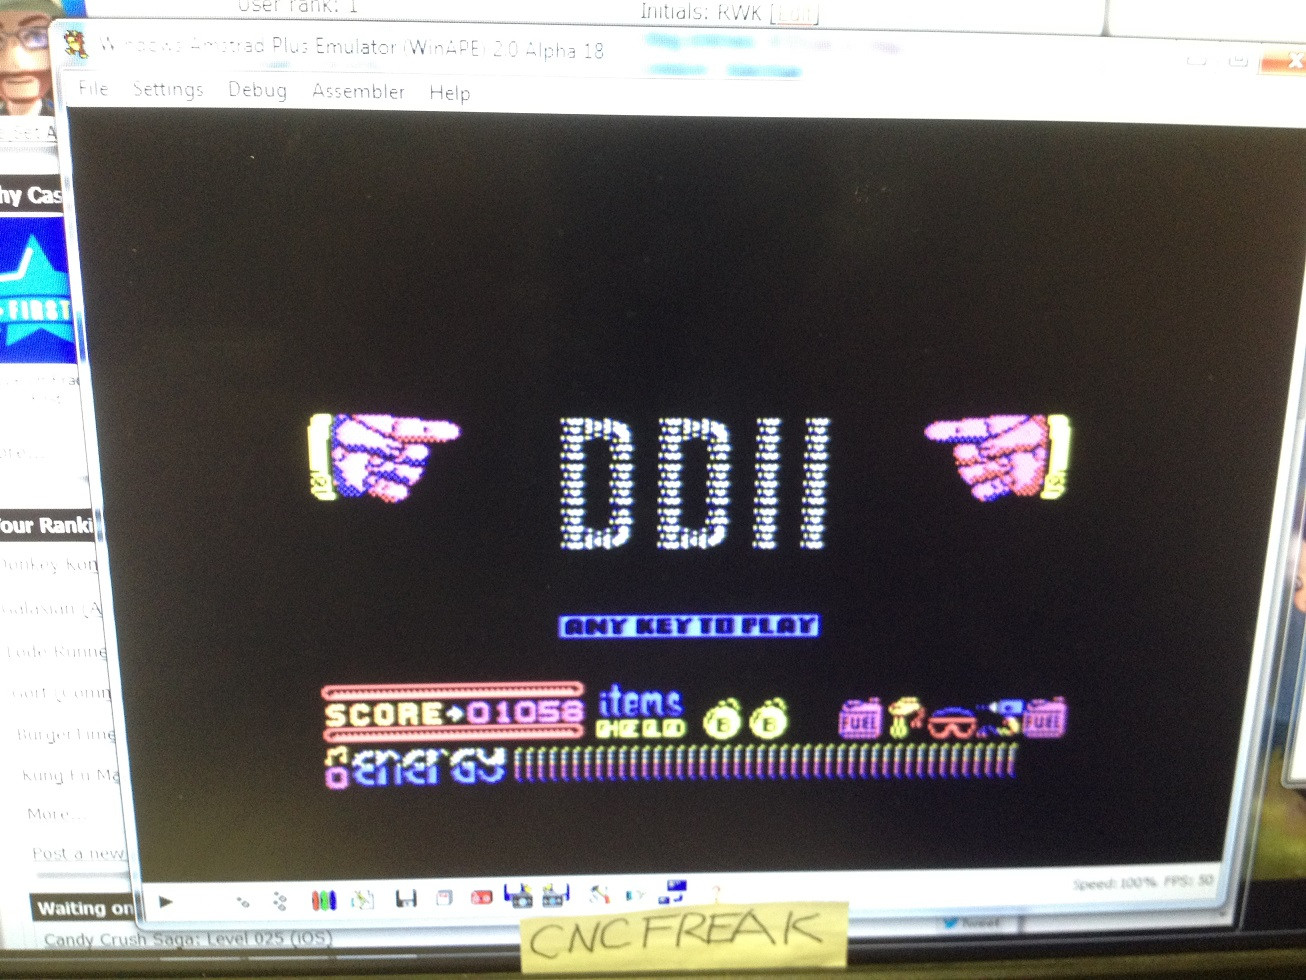 cncfreak: Dynamite Dan 2 (Amstrad CPC Emulated) 1,058 points on 2013-10-19 04:23:04